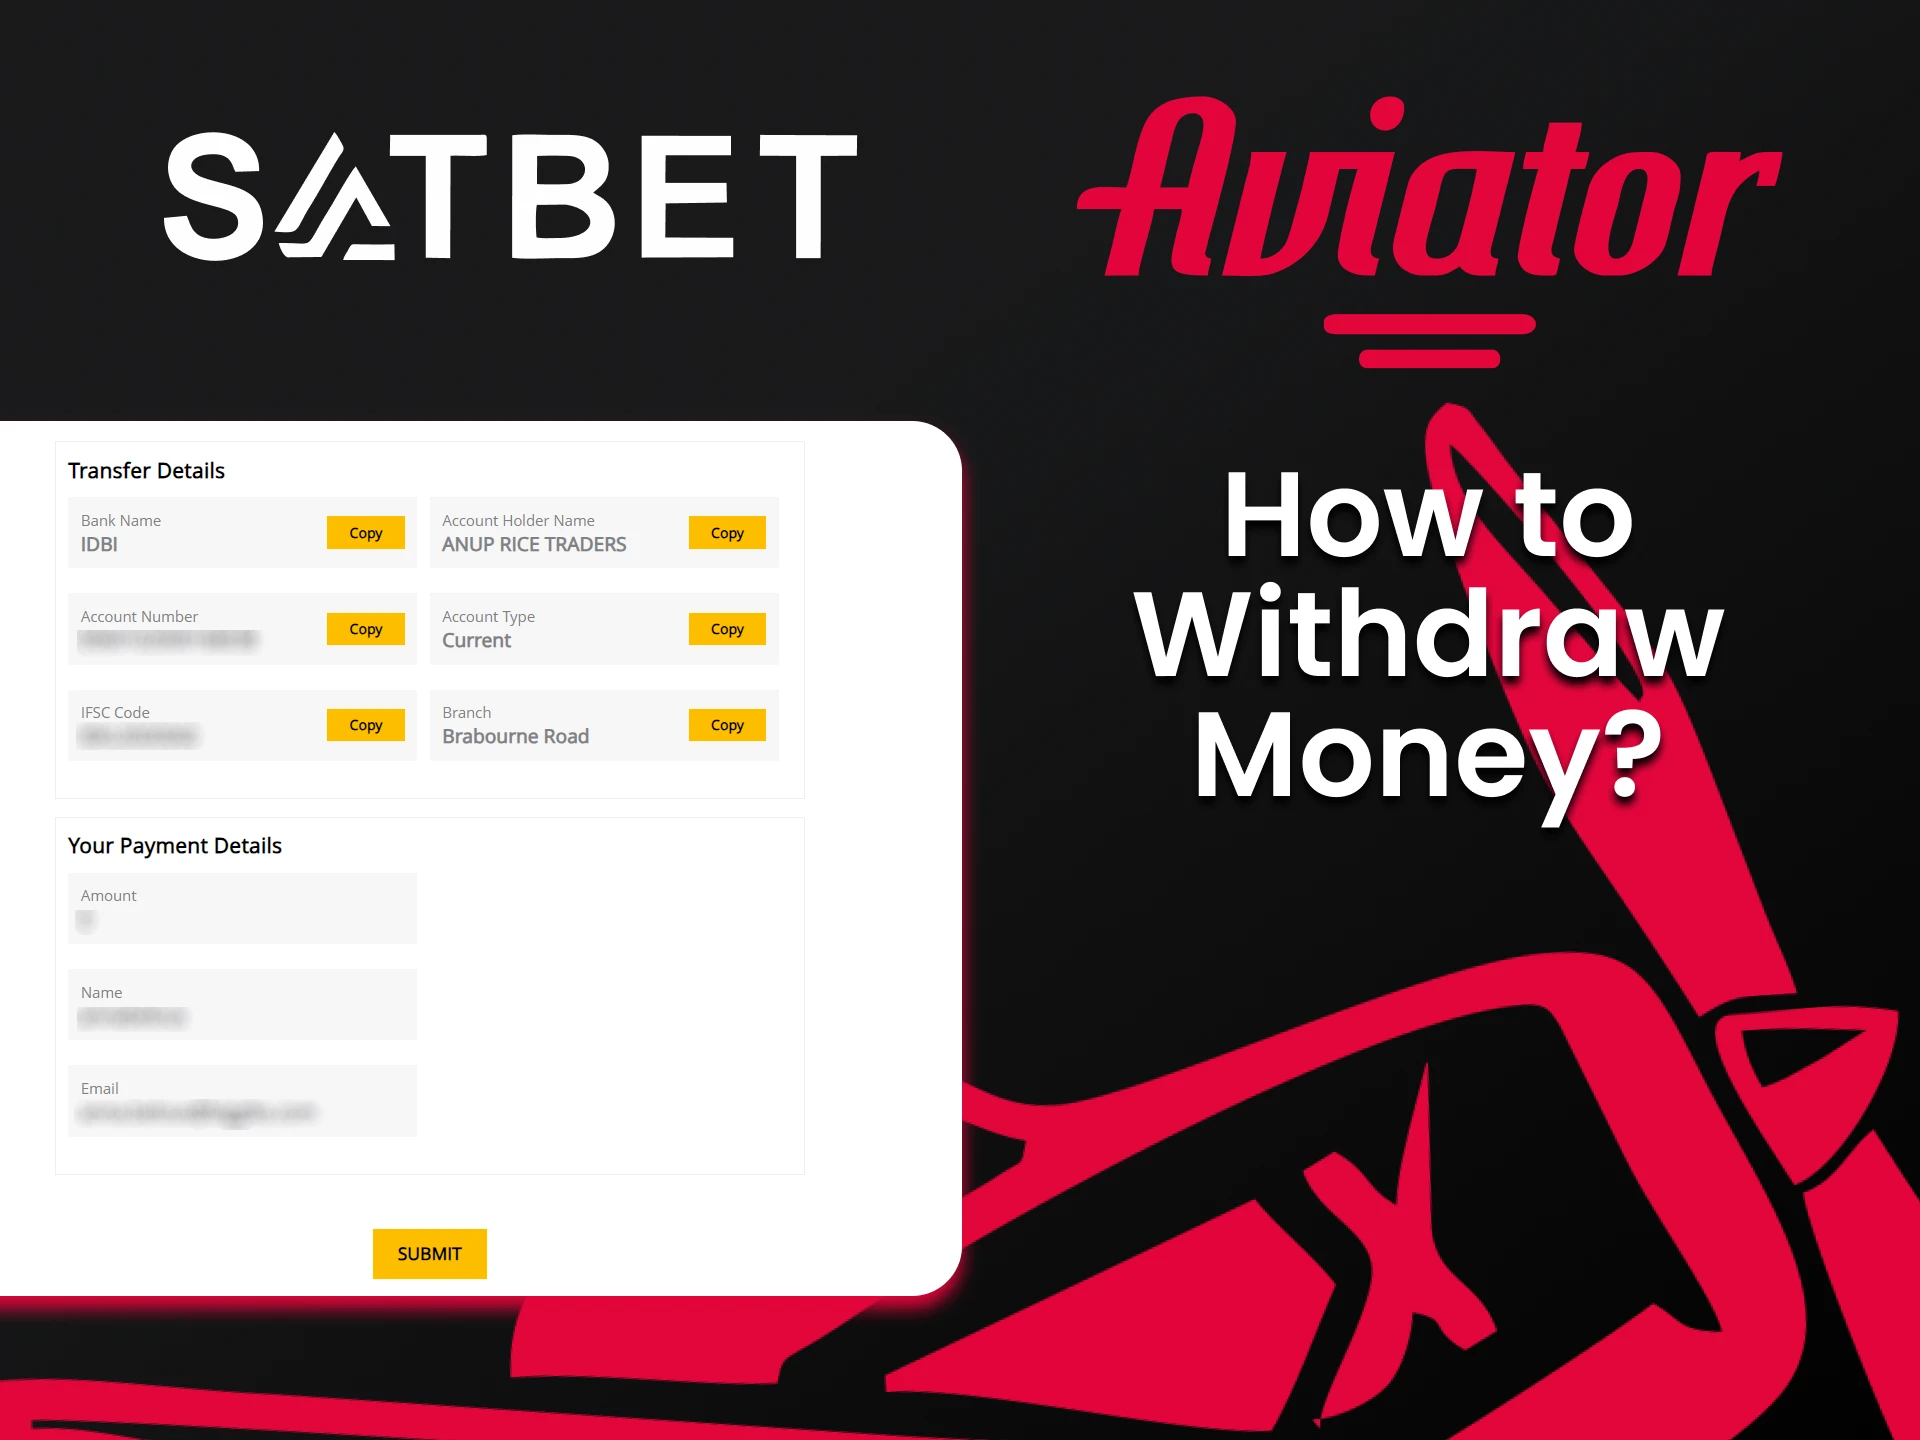 Choose your way to withdraw funds to Satbet.